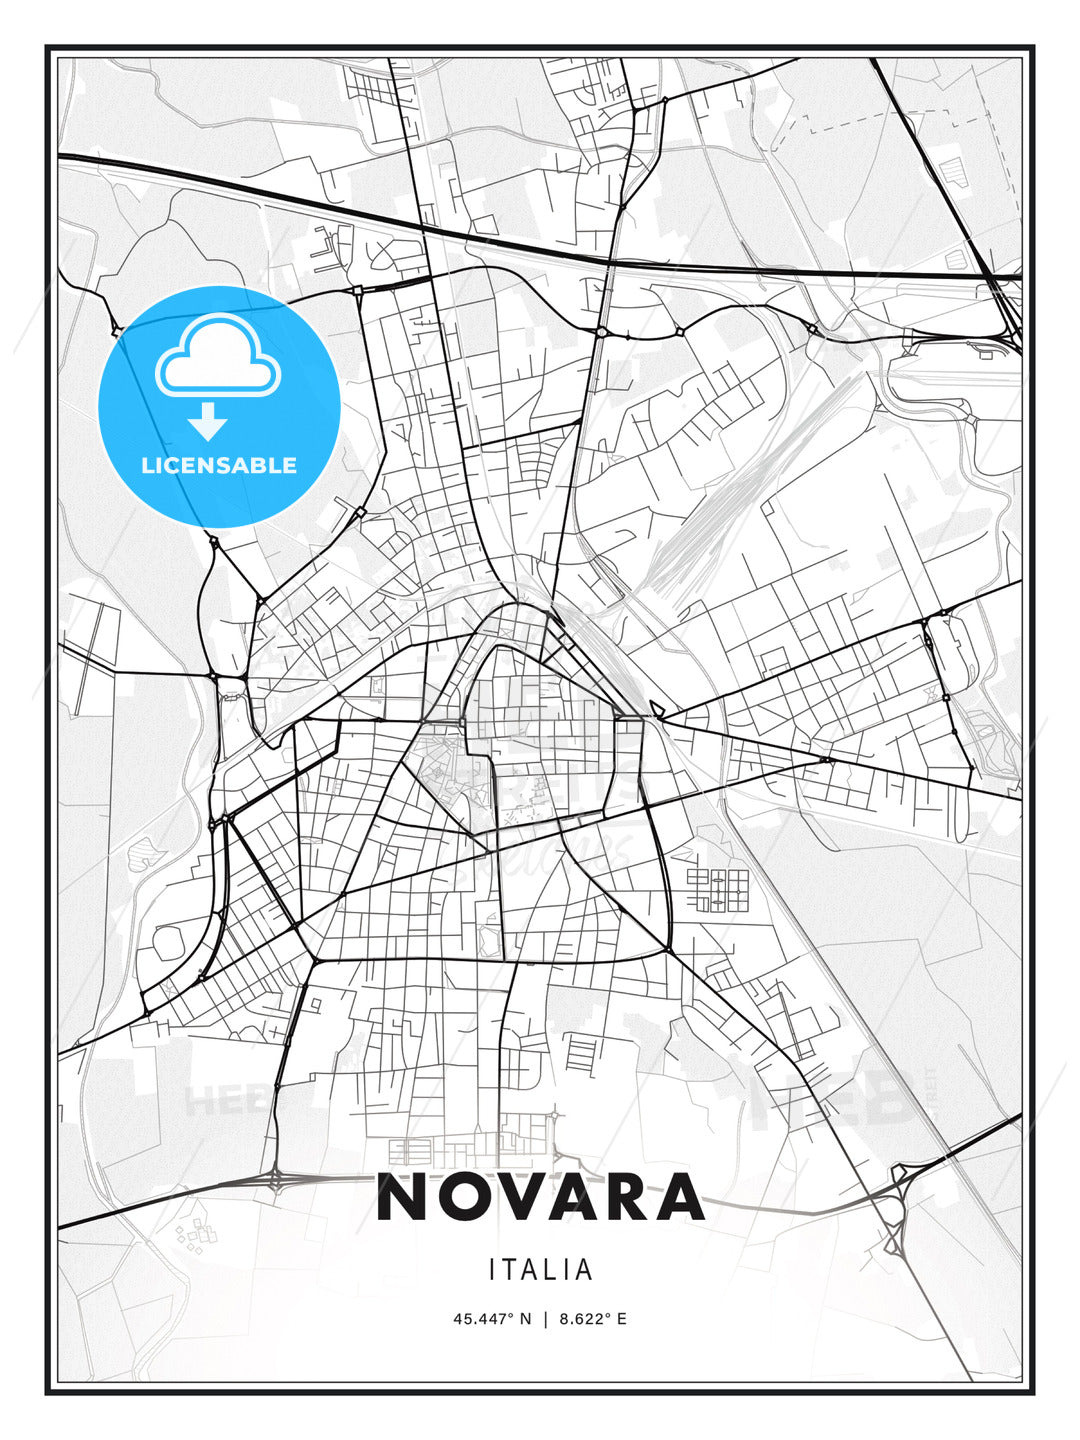 Novara, Italy, Modern Print Template in Various Formats - HEBSTREITS Sketches